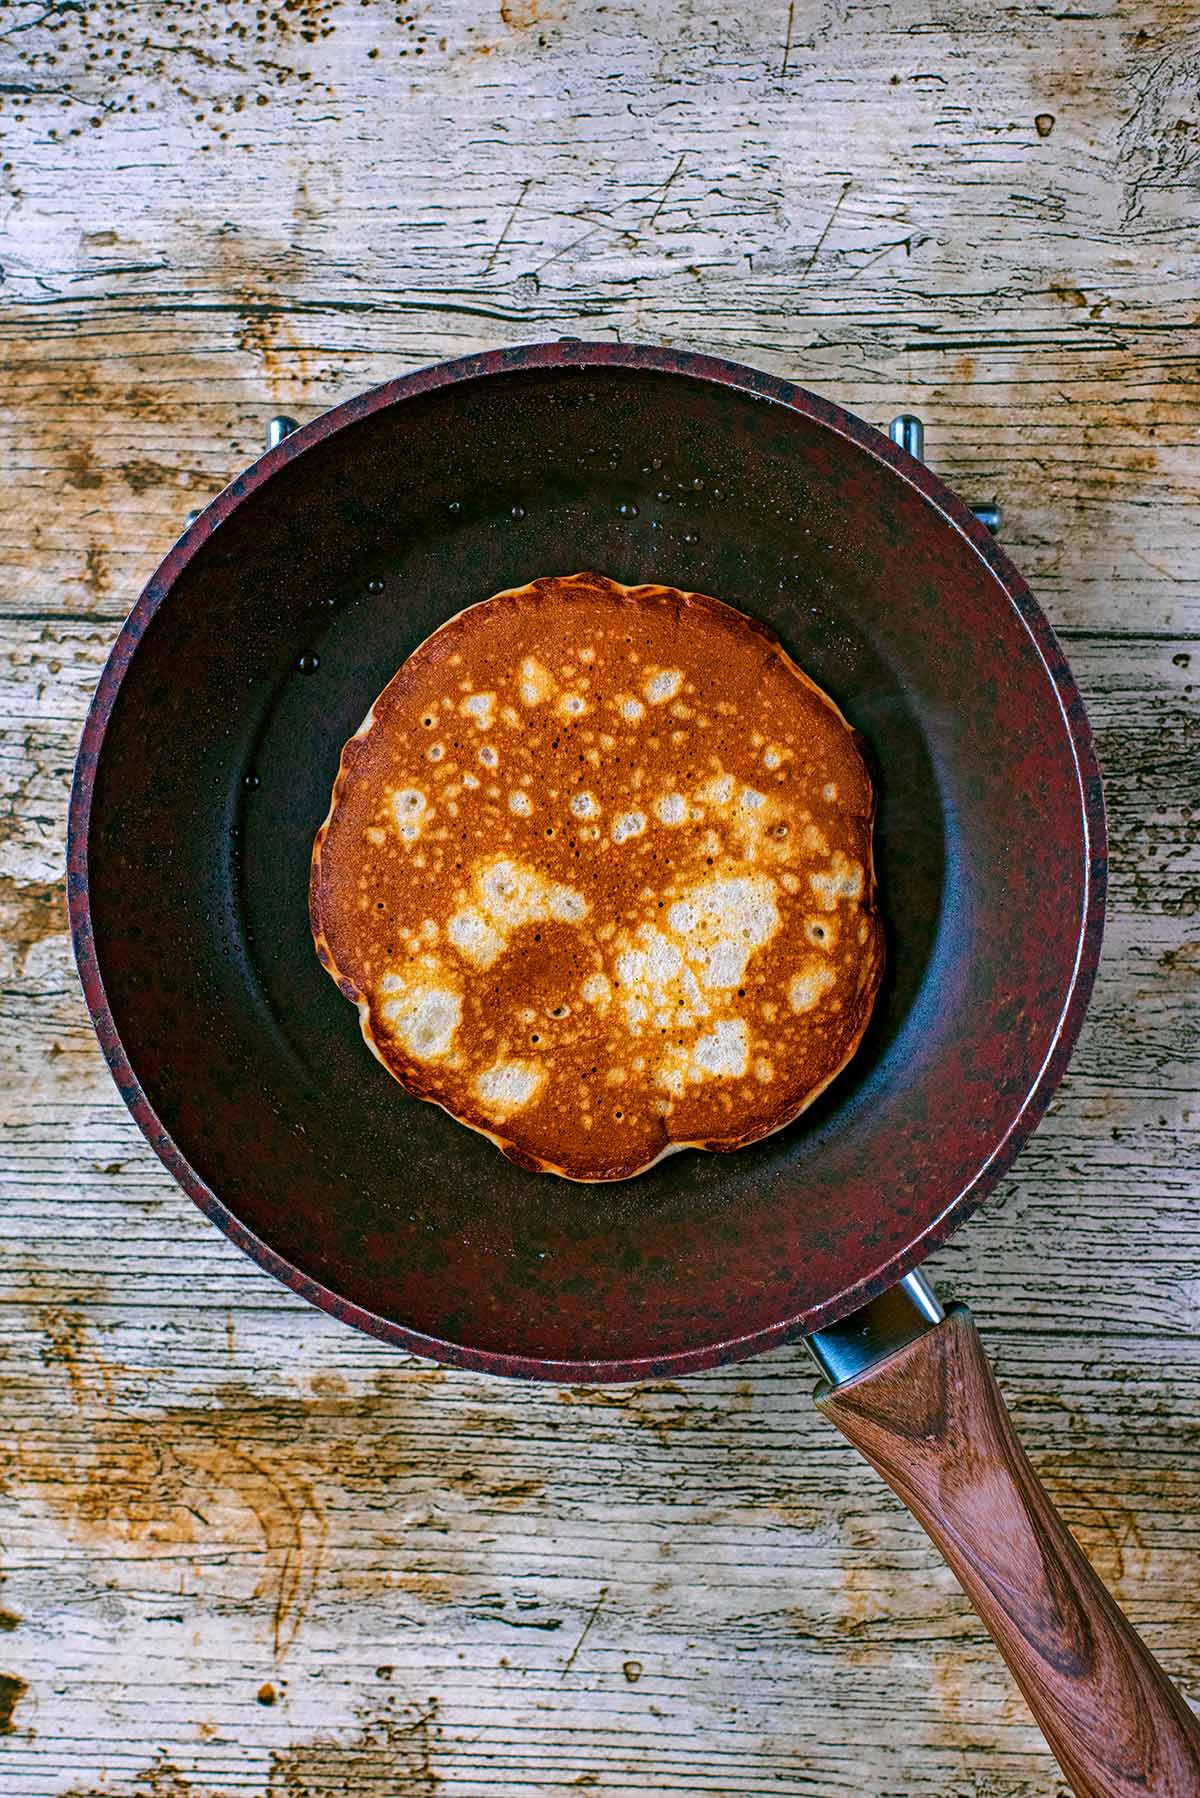 A frying pan with a cooked pancake.